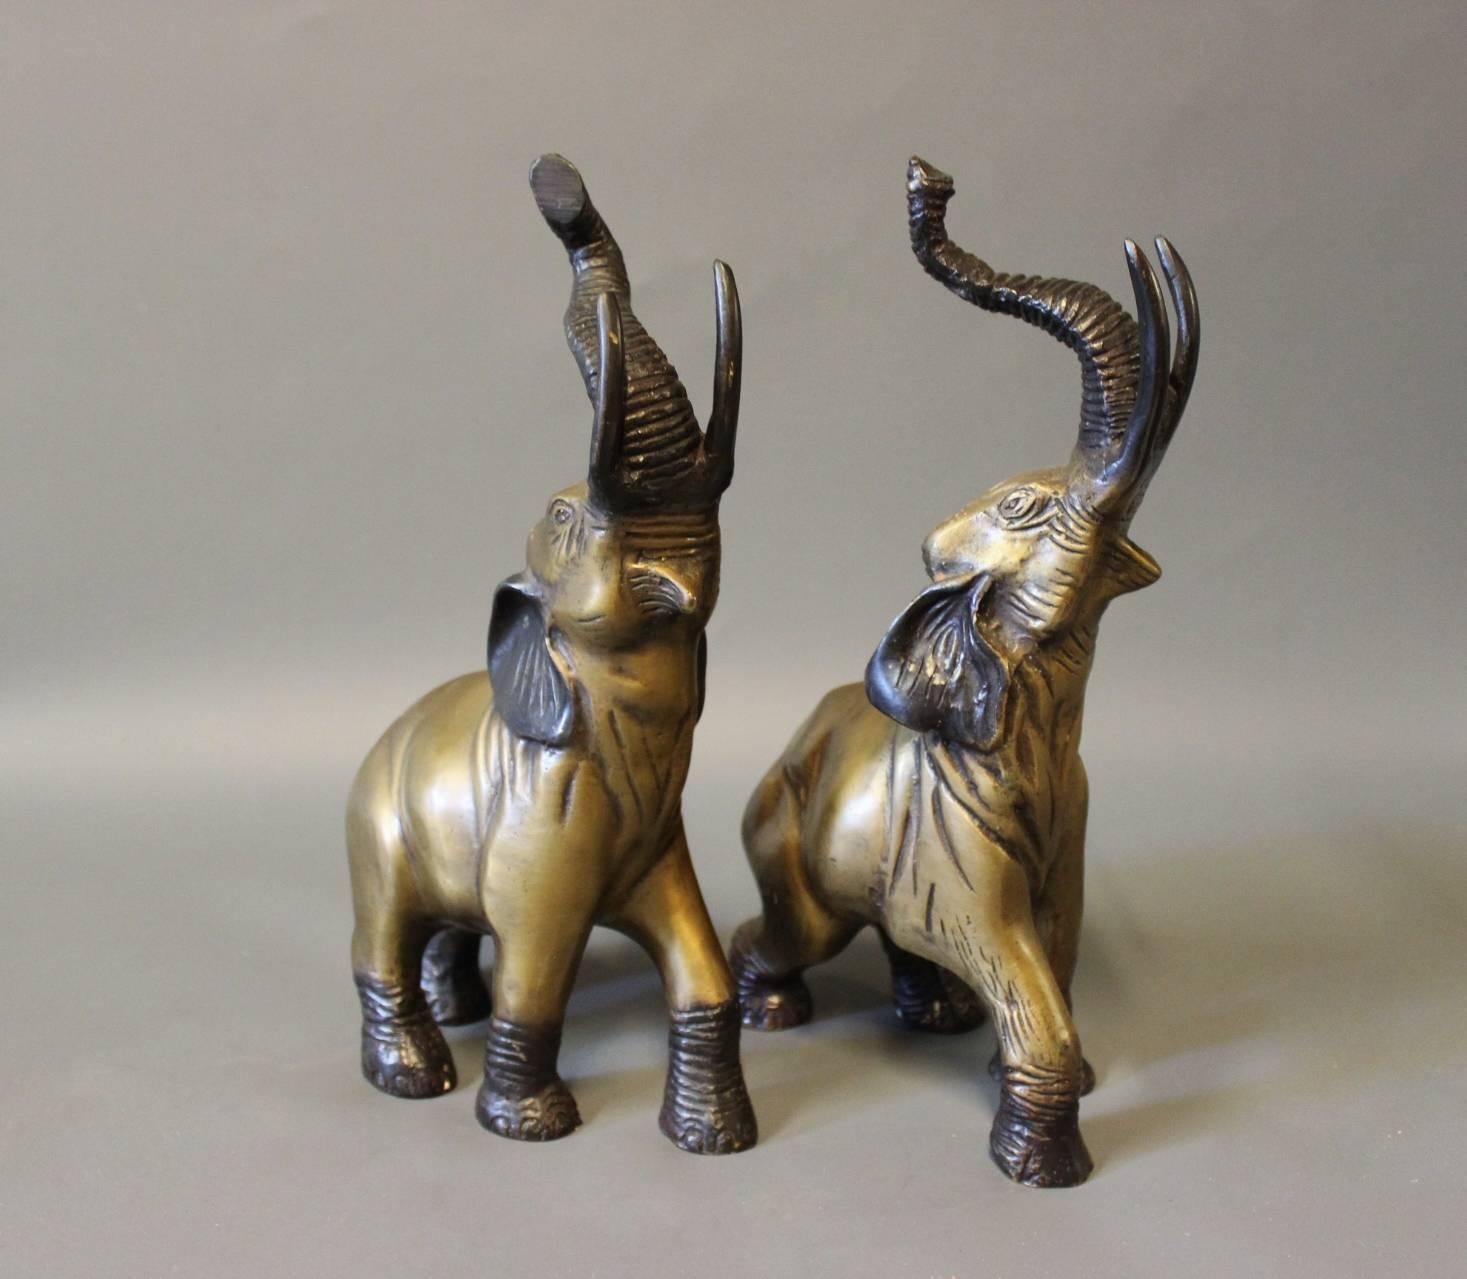 A pair of brass elephants from the 1930s. They are in great vintage condition.